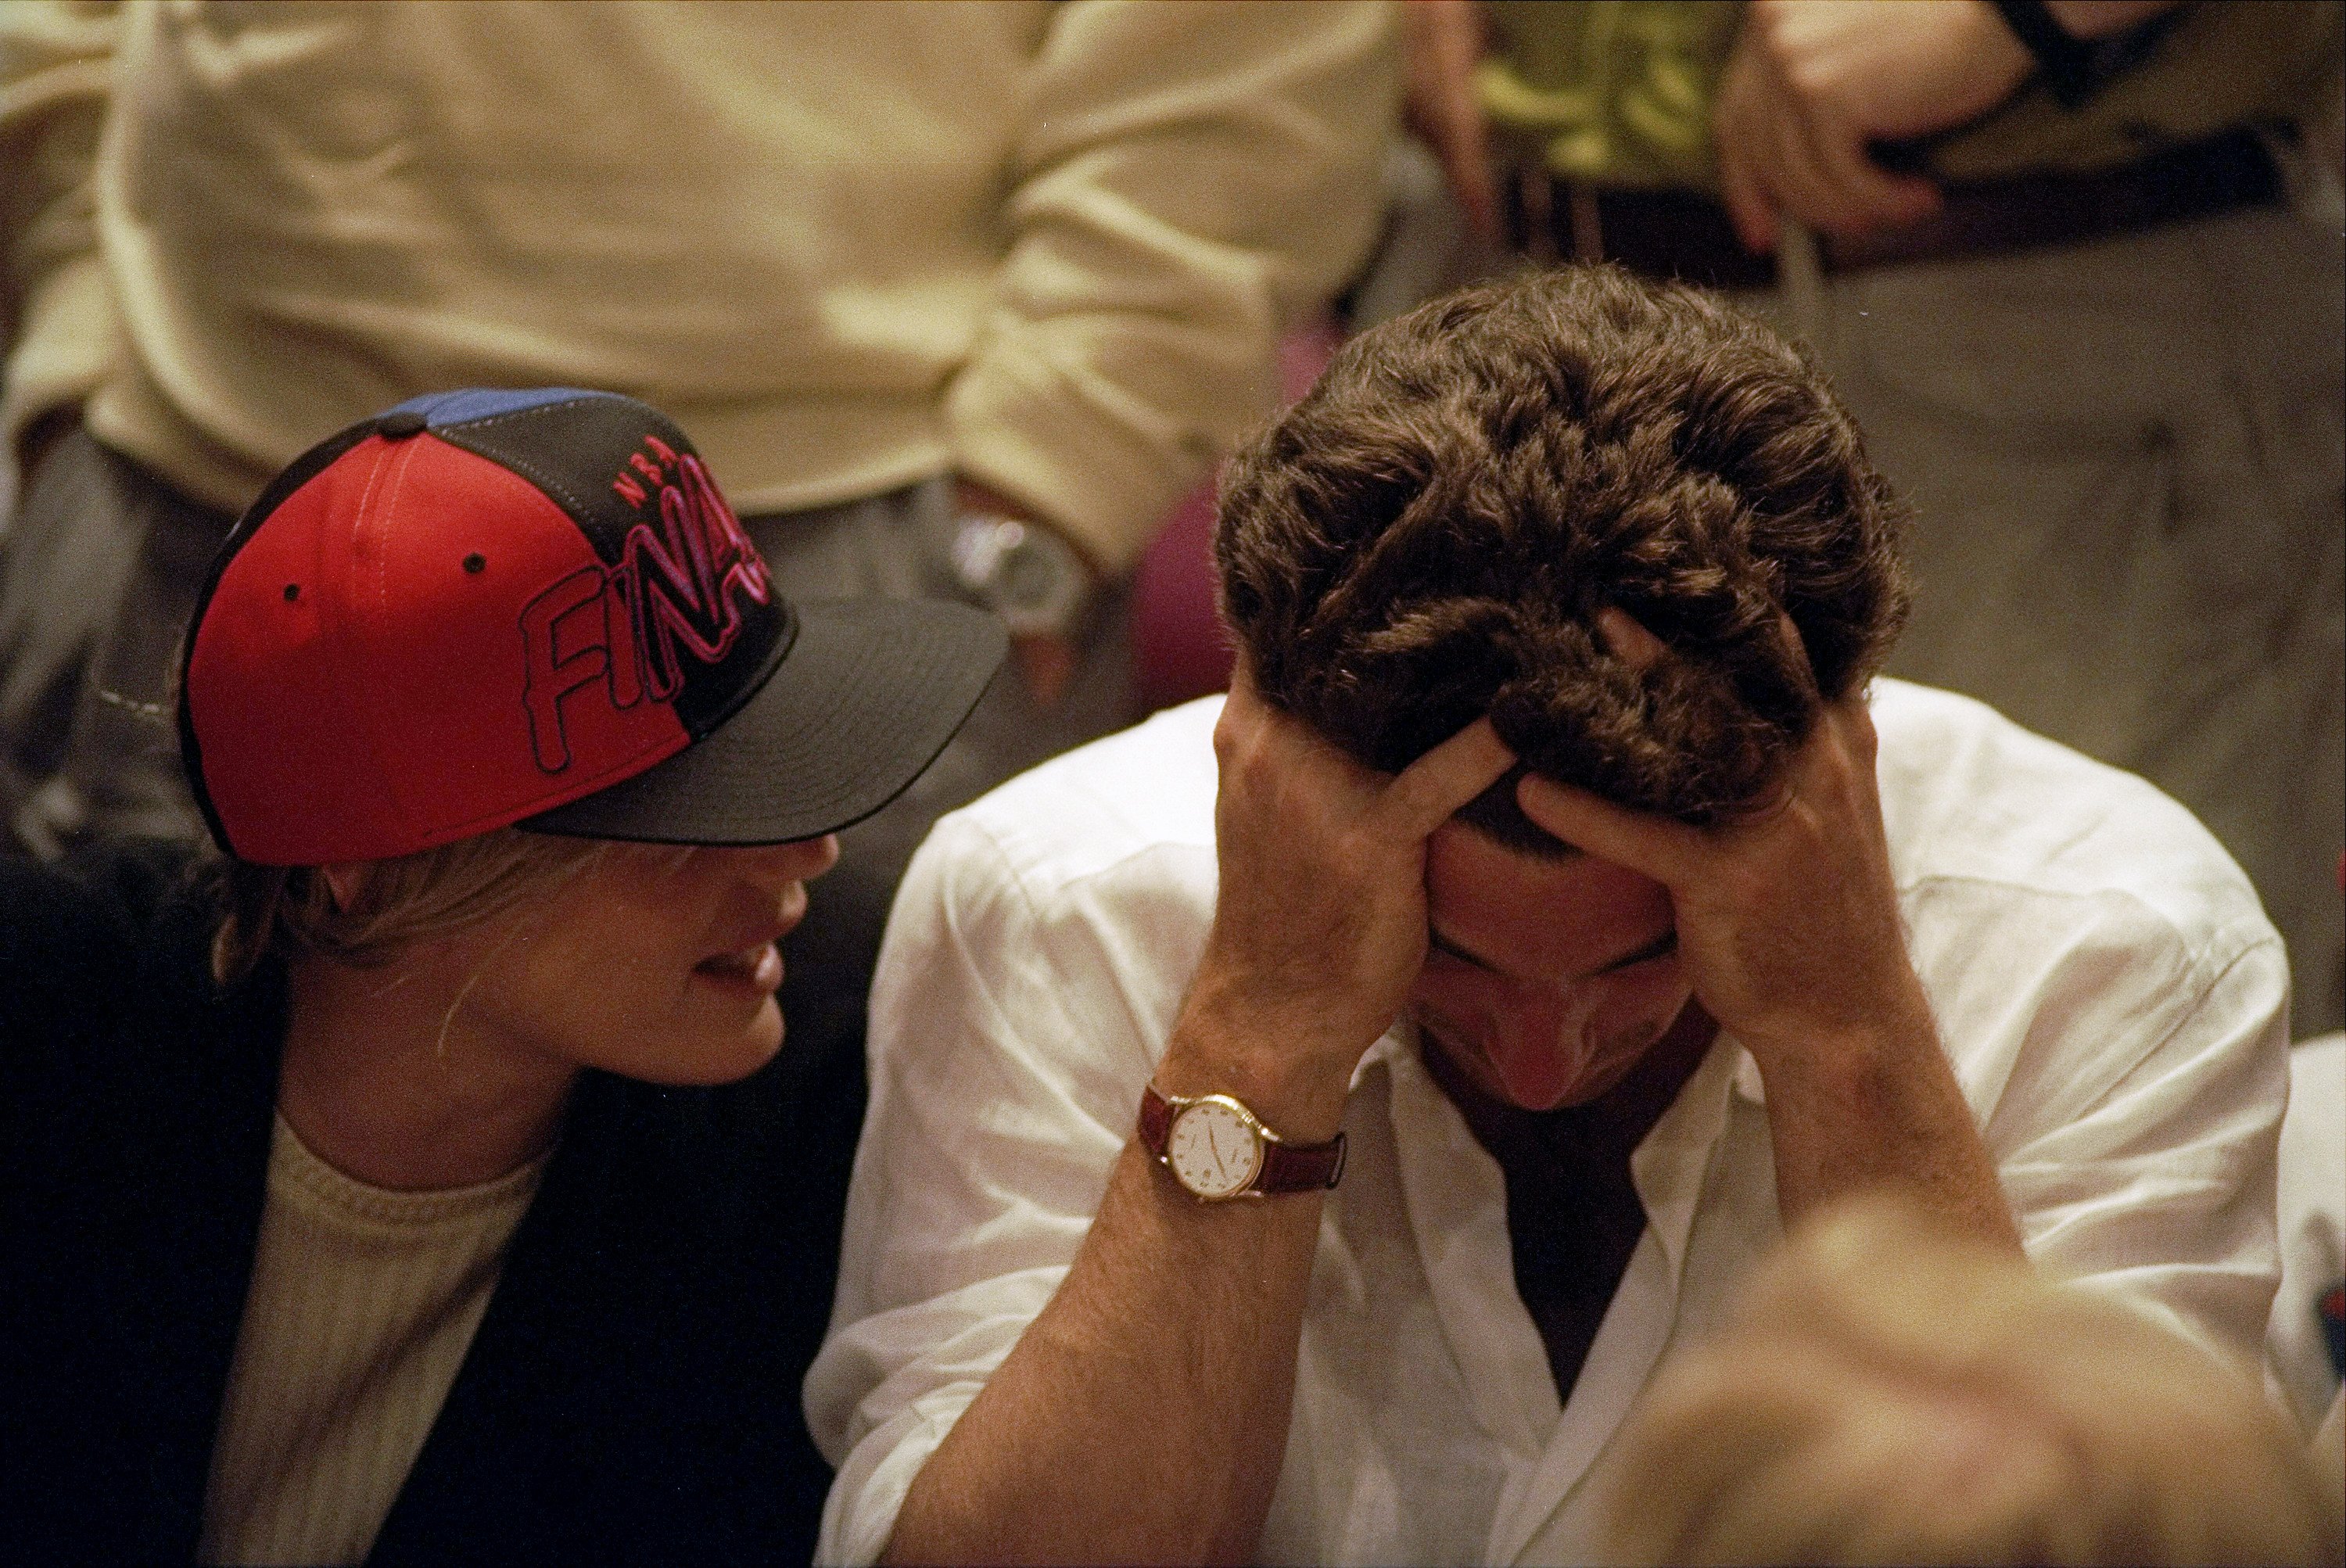 John F. Kennedy Jr. pictured with his head down while his girlfriend, Daryl Hannah, talks to him during game between the New York Knicks and the Houston Rockets at Madison Square Garden. / Source: Getty Images